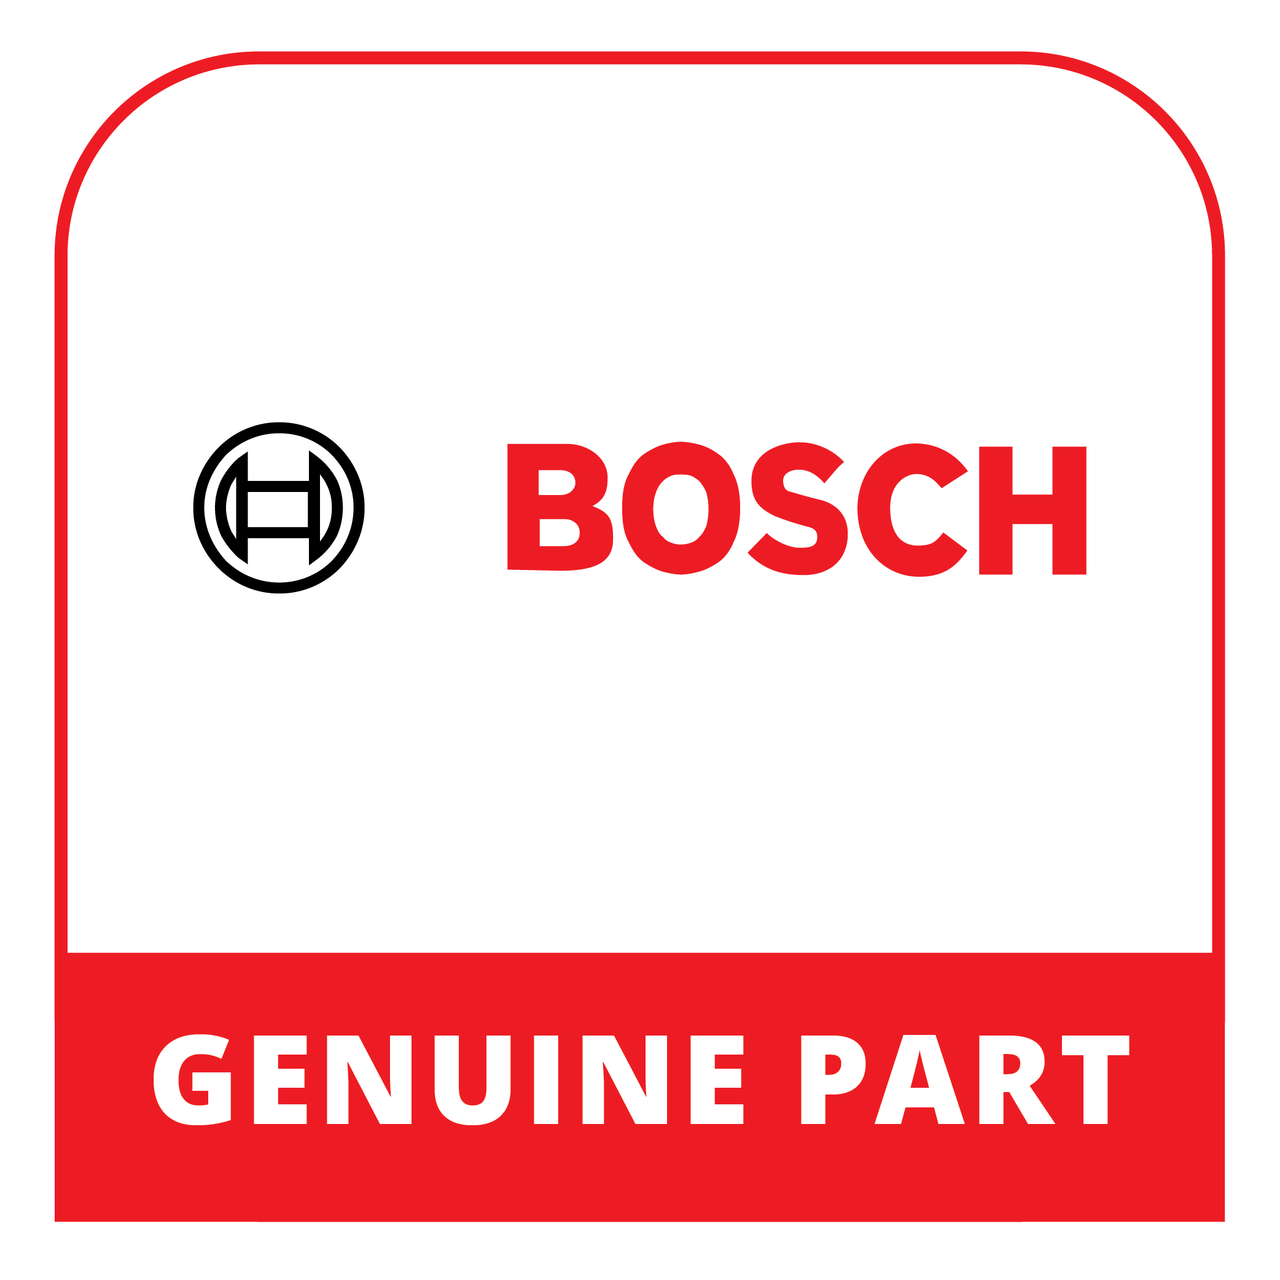 Bosch (Thermador) 20001959 - Support - Genuine Bosch (Thermador) Part